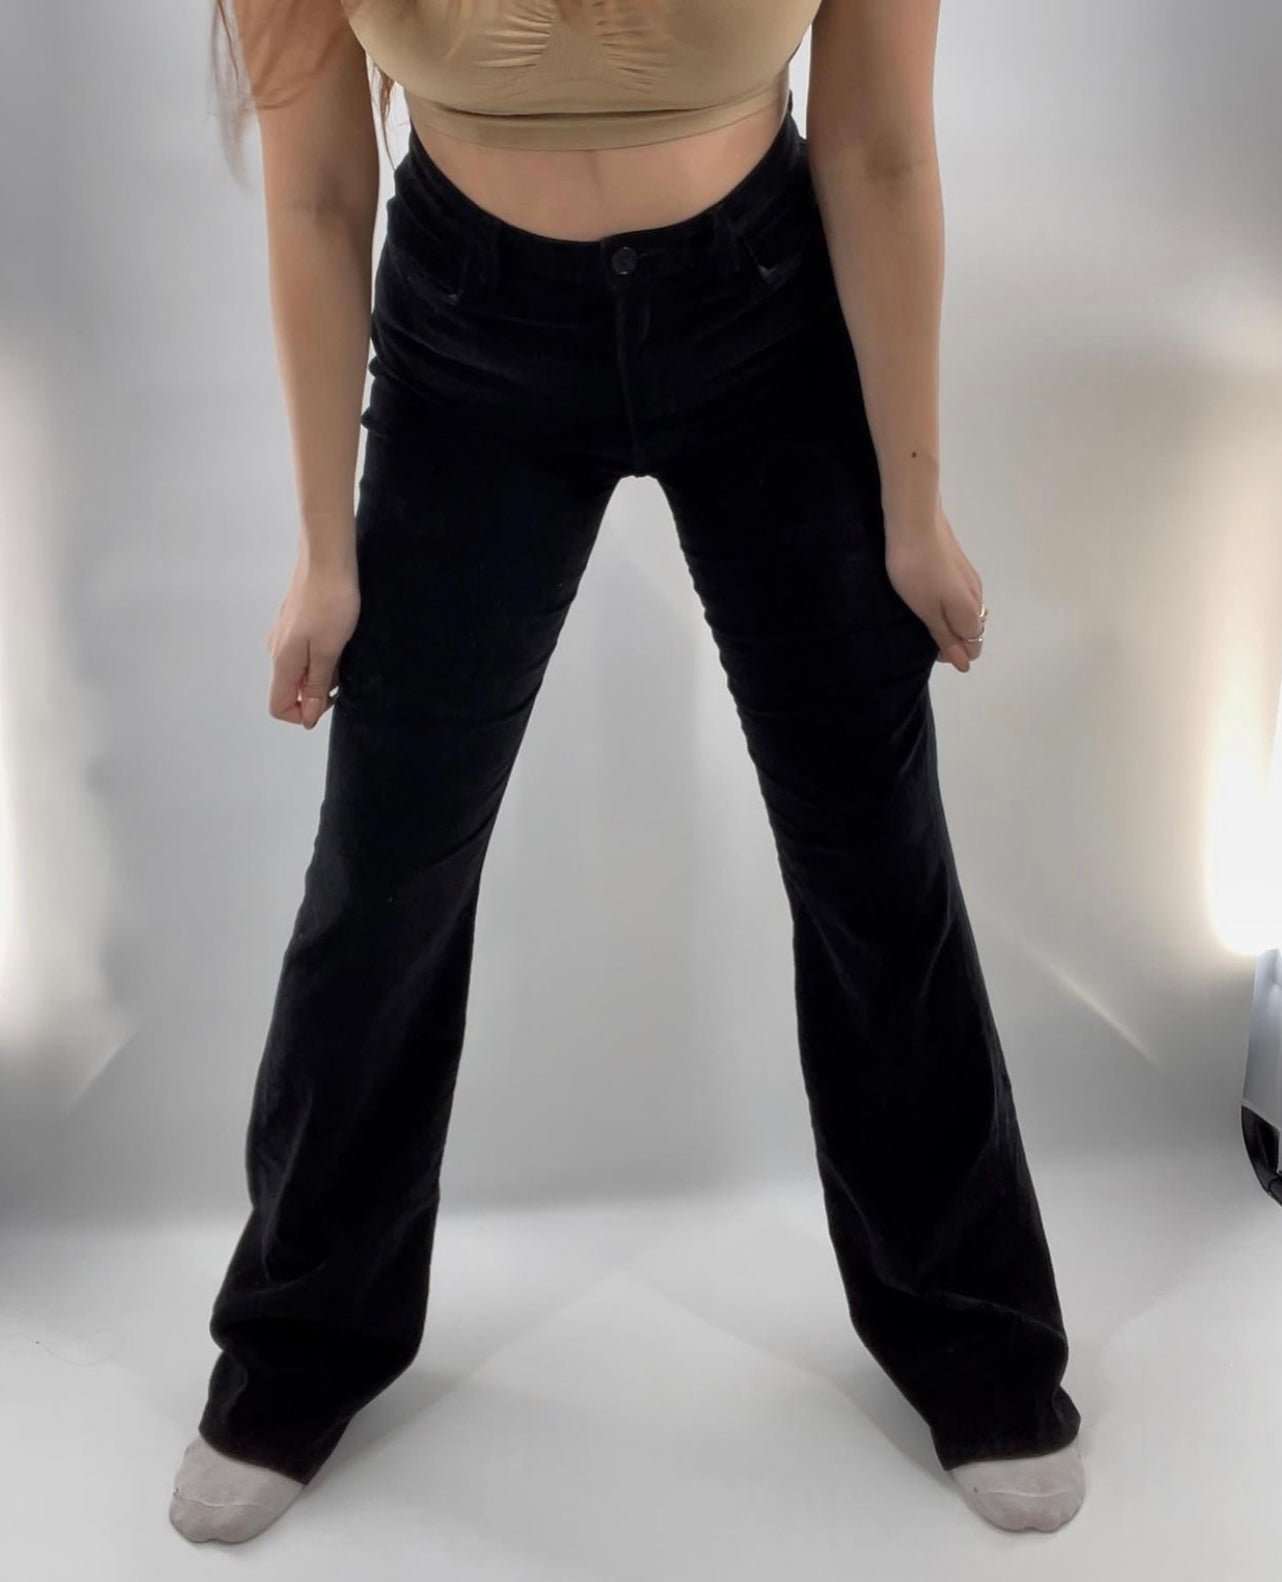 Reformation Black Velvet Pants with stitching on Butt (Sz 28)